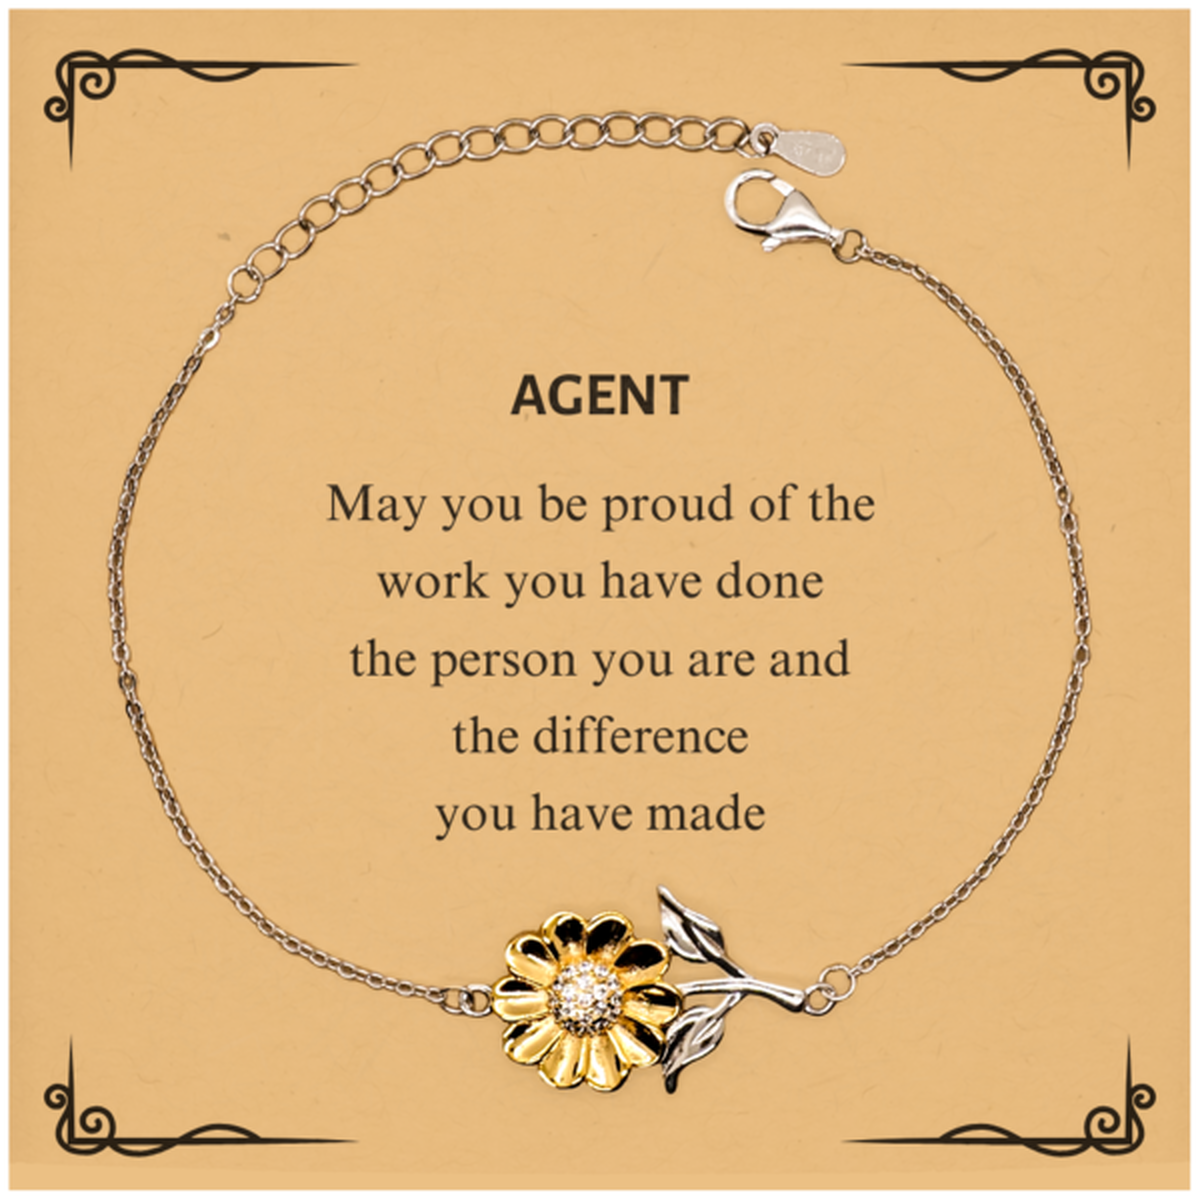 Agent May you be proud of the work you have done, Retirement Agent Sunflower Bracelet for Colleague Appreciation Gifts Amazing for Agent